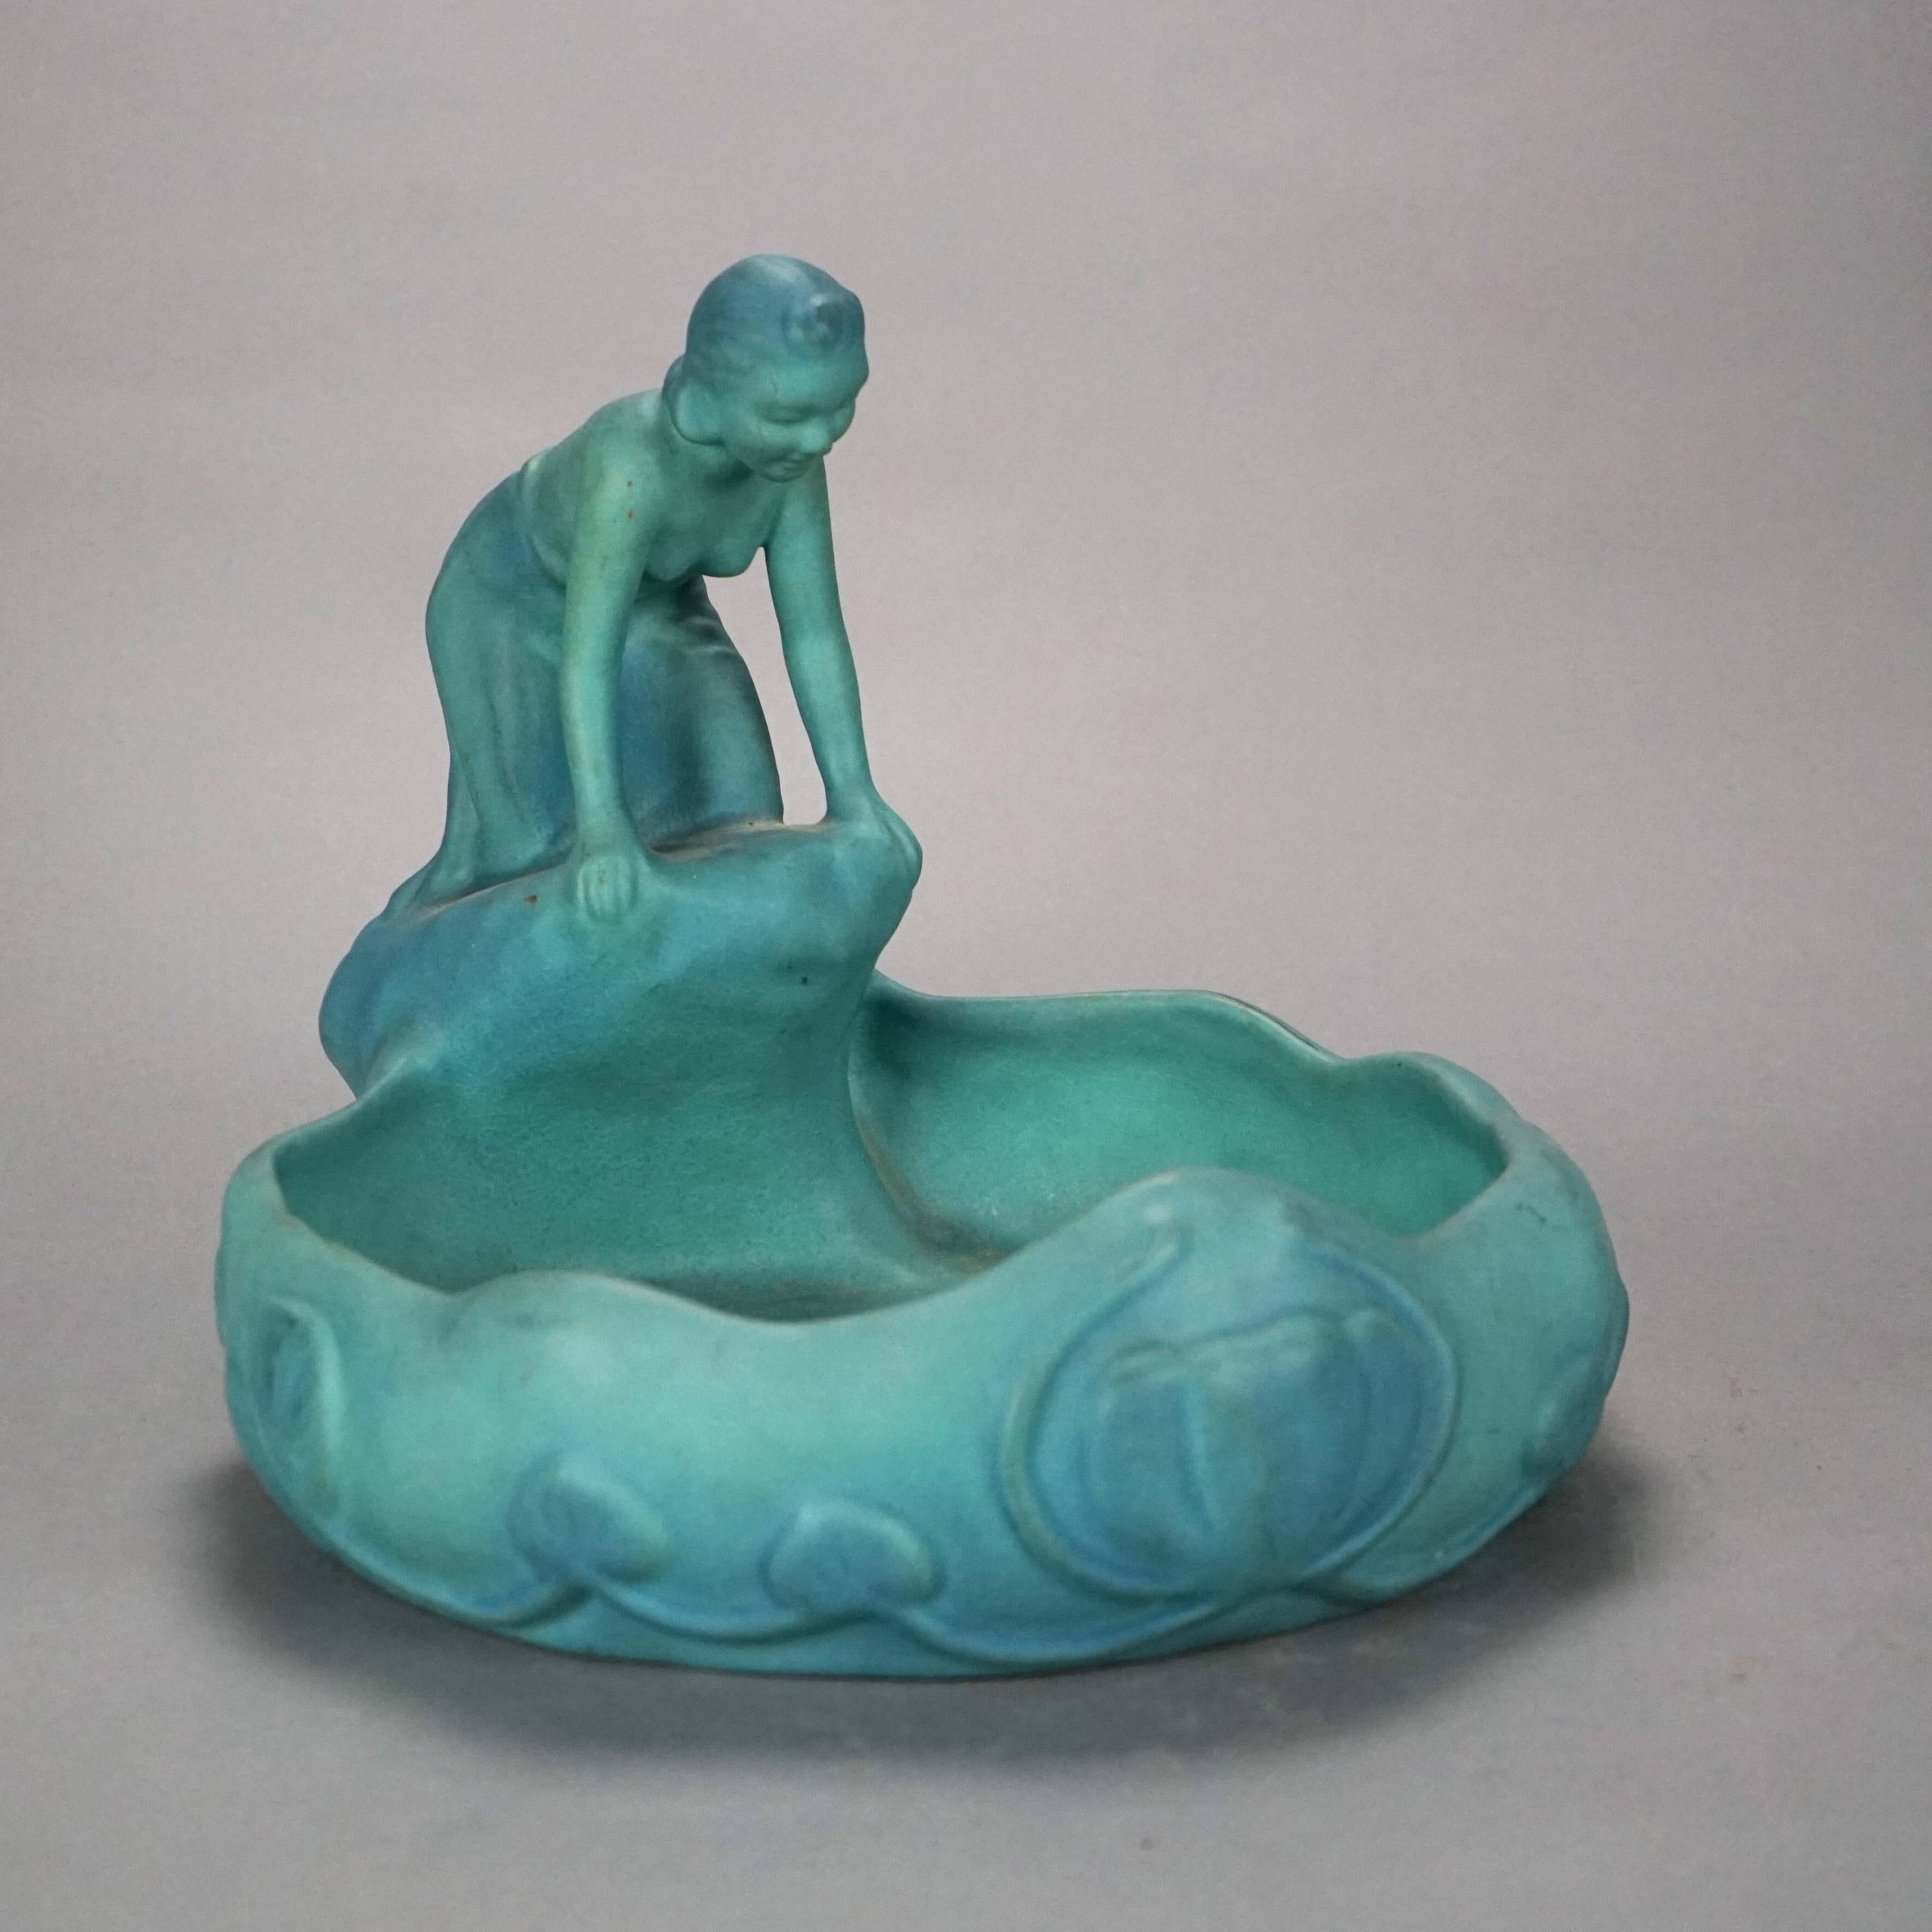 American Antique Arts & Crafts Van Briggle Art Pottery Figural Lady of the Lake, c1920